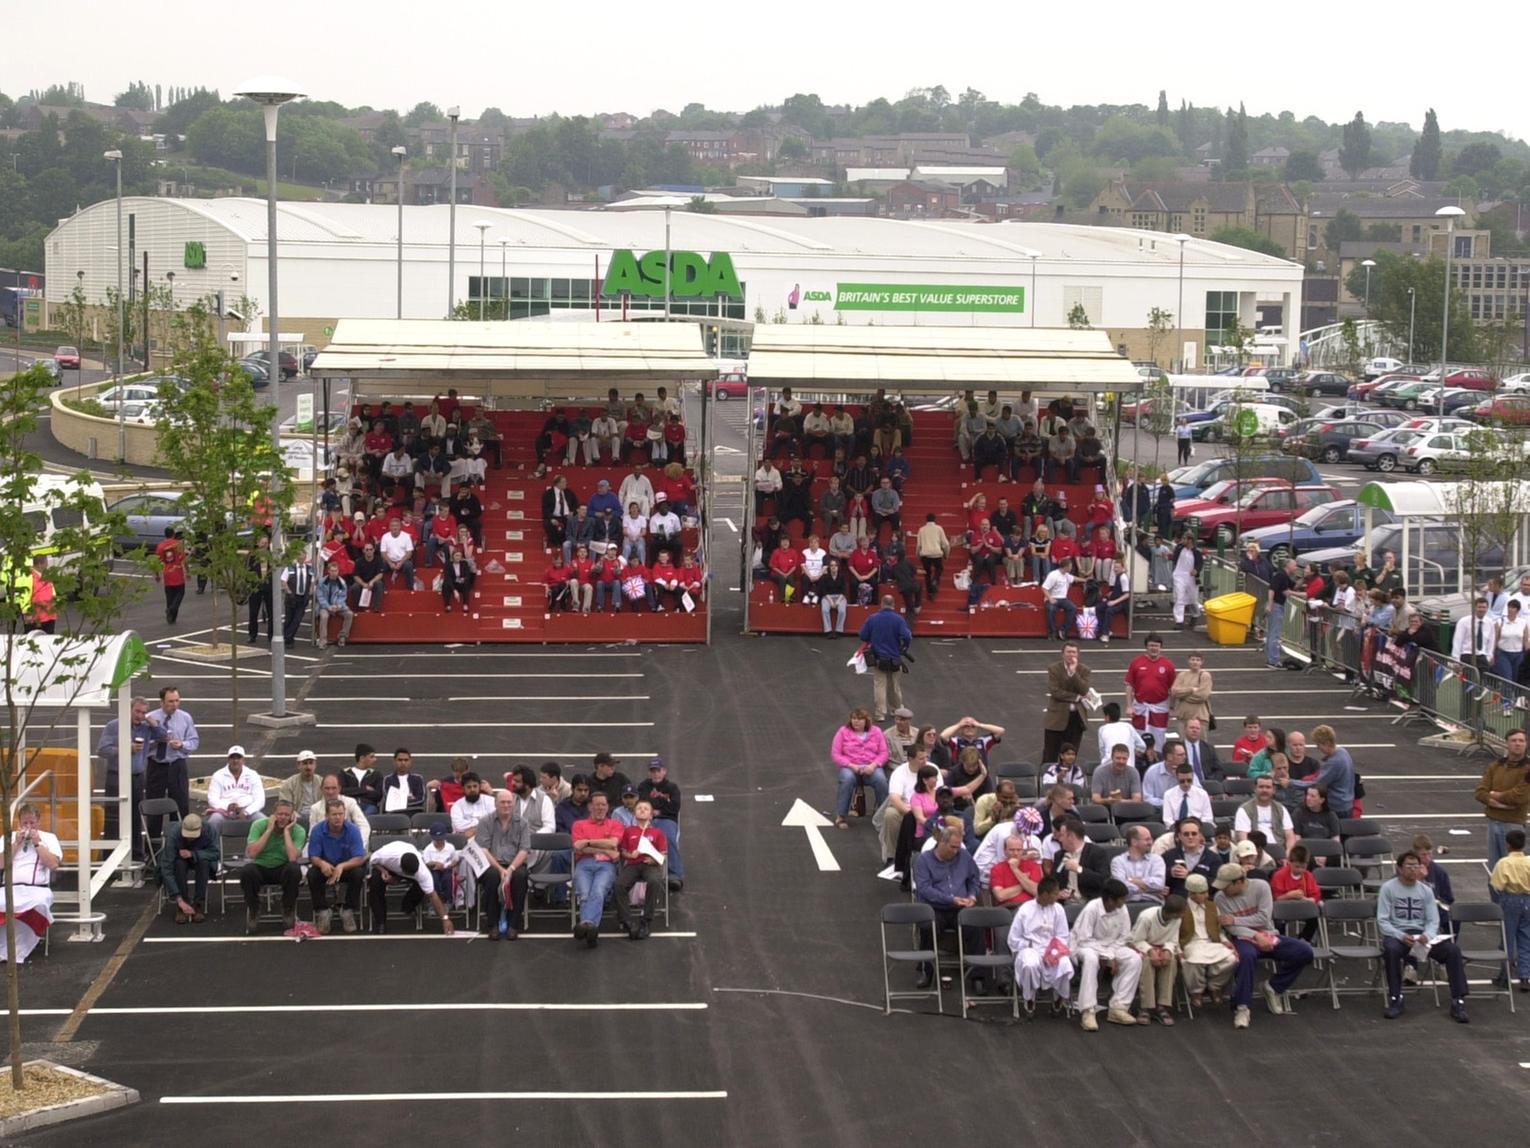 Were you at the Asda Store in Dewsbury to watch England v Argentina back in the day?